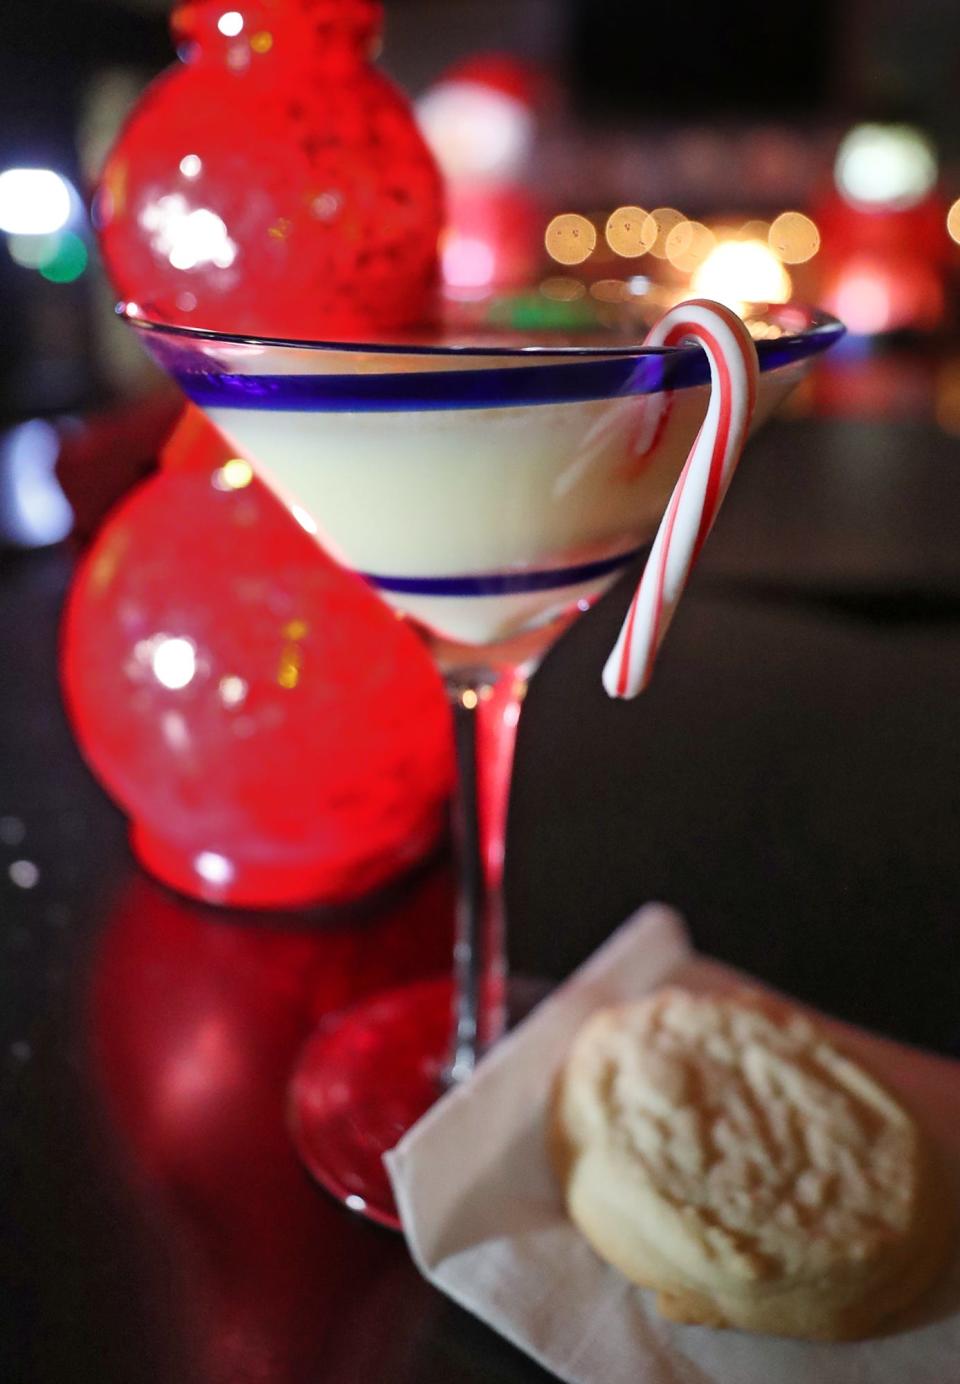 The holiday drink "Merry Christmas, You Filthy Animal!," which has eggnog and a double shot of rum, is served with a Christmas cookie at The President's Lounge's Reindeer Room, a Christmas pop-up in Ellet.